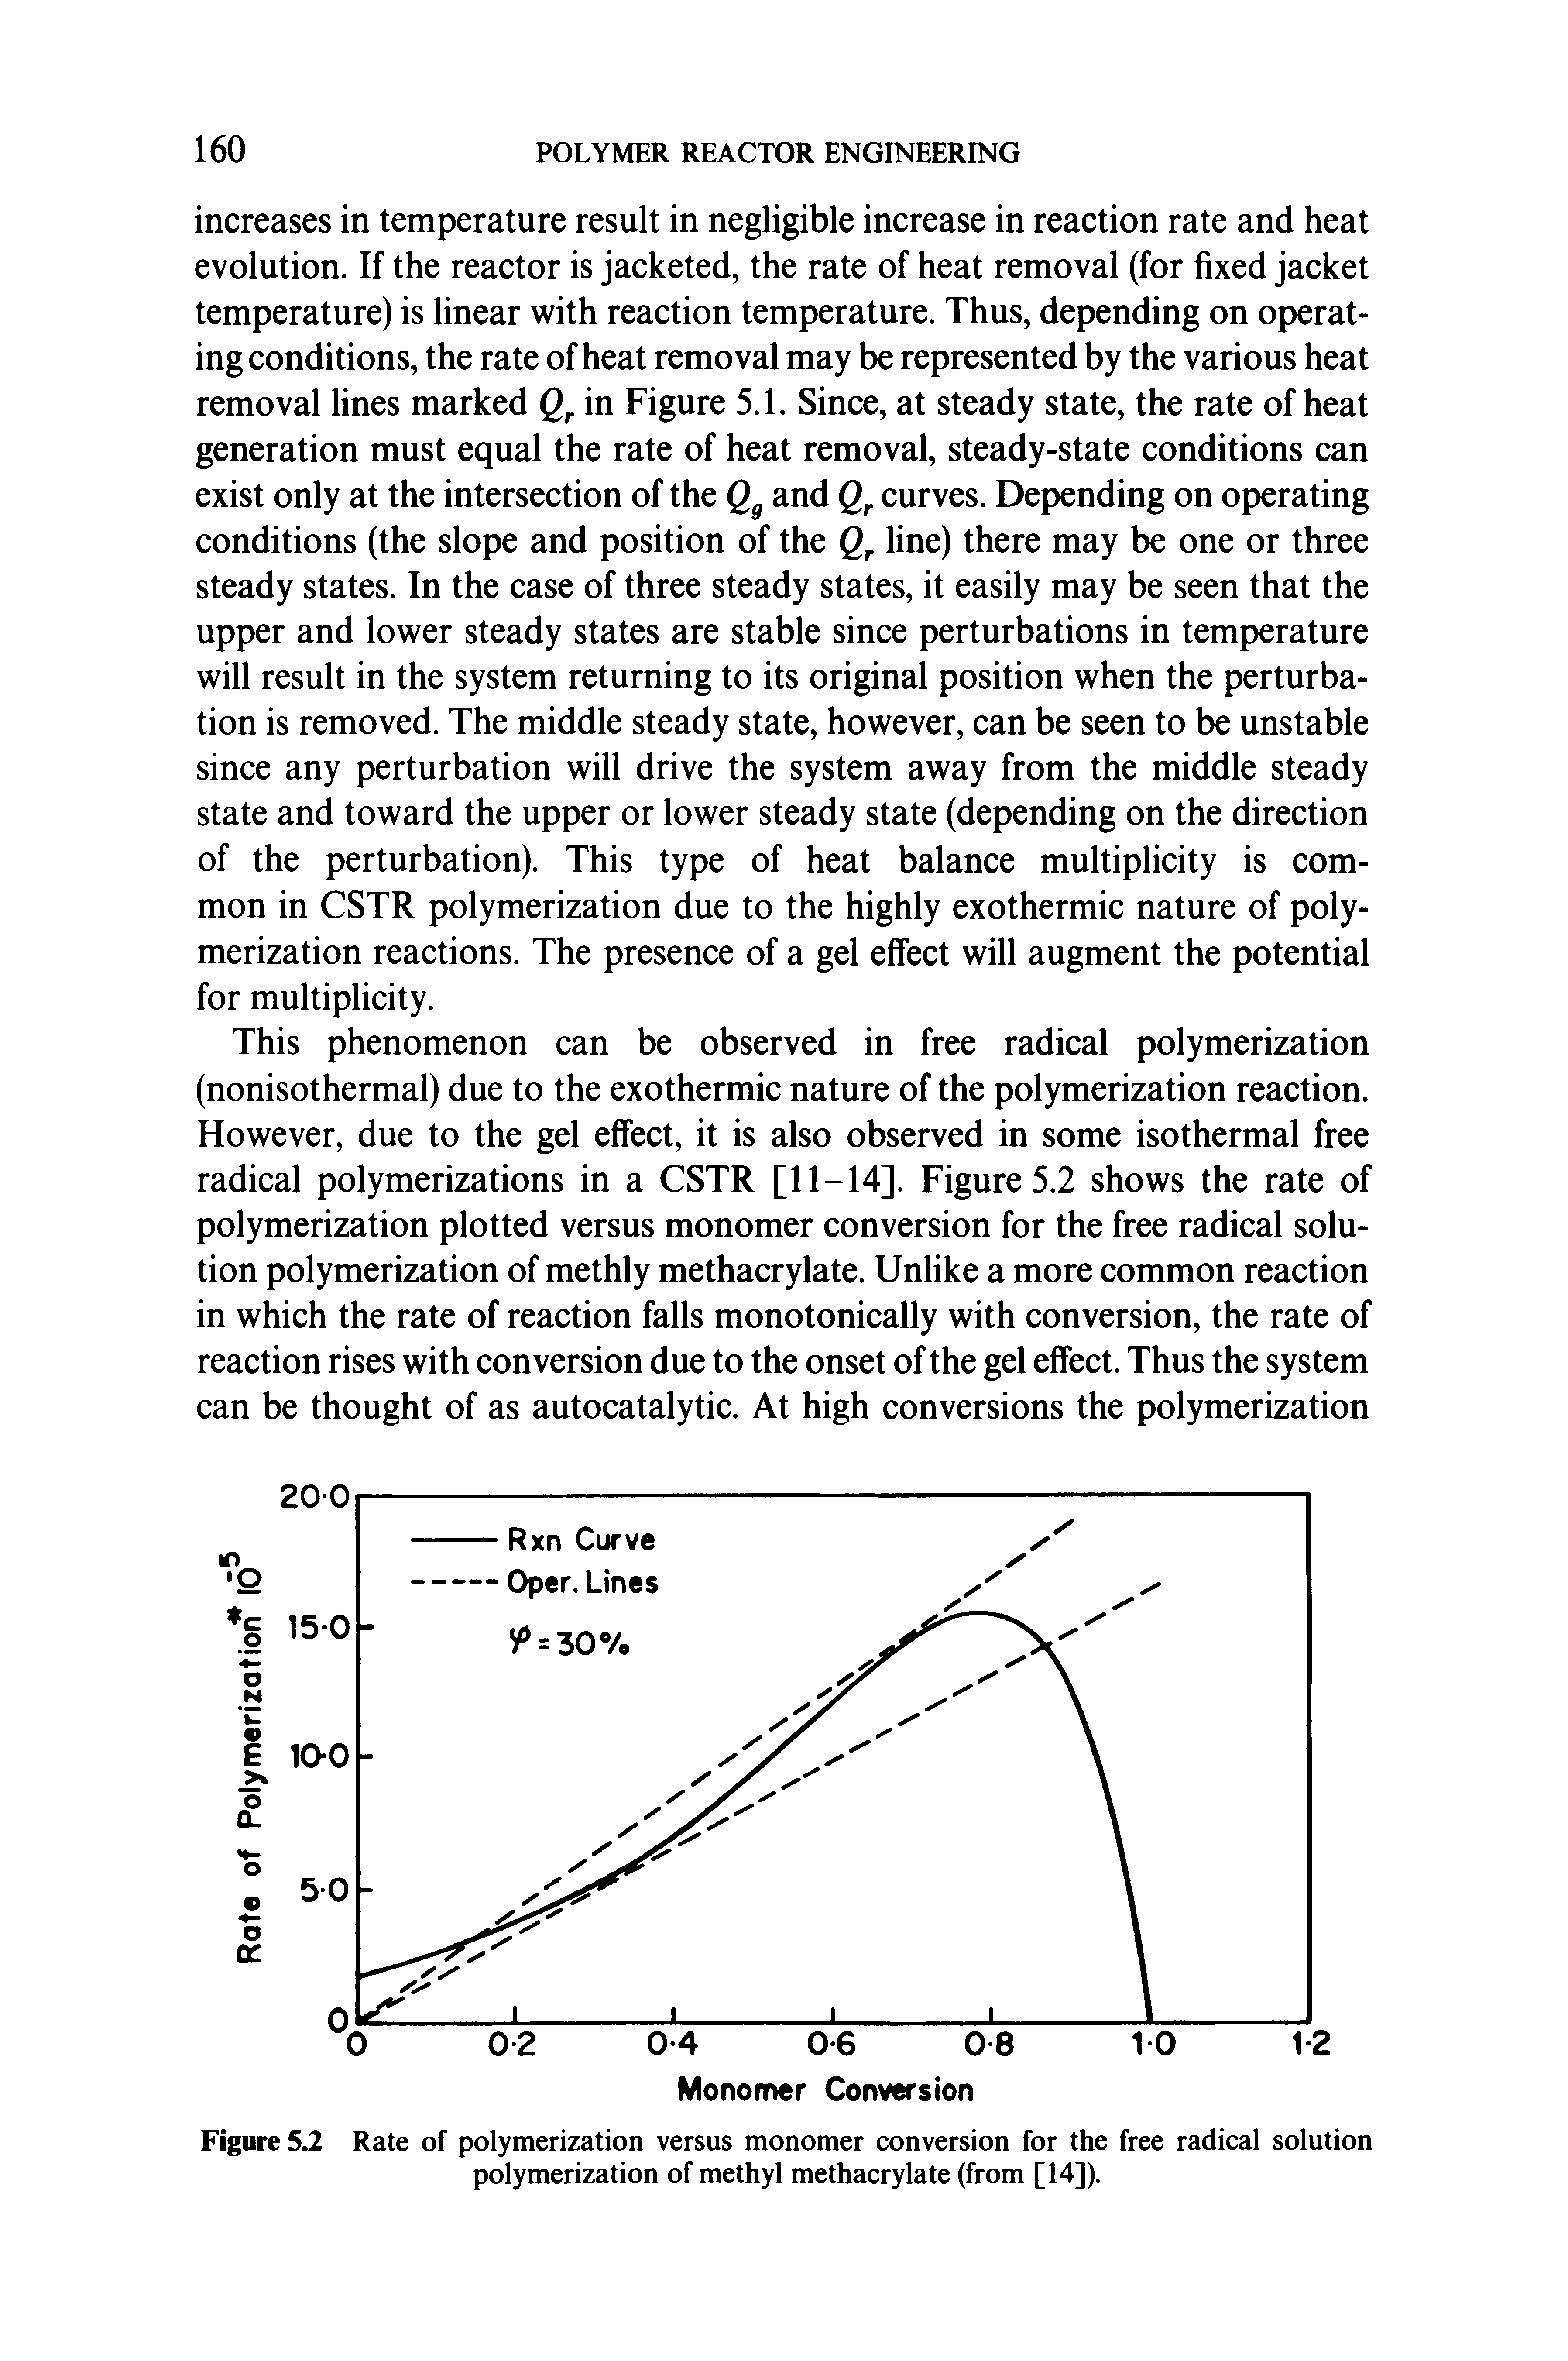 Figure 5.2 Rate of polymerization versus monomer conversion for the free radical solution polymerization of methyl methacrylate (from [14]).